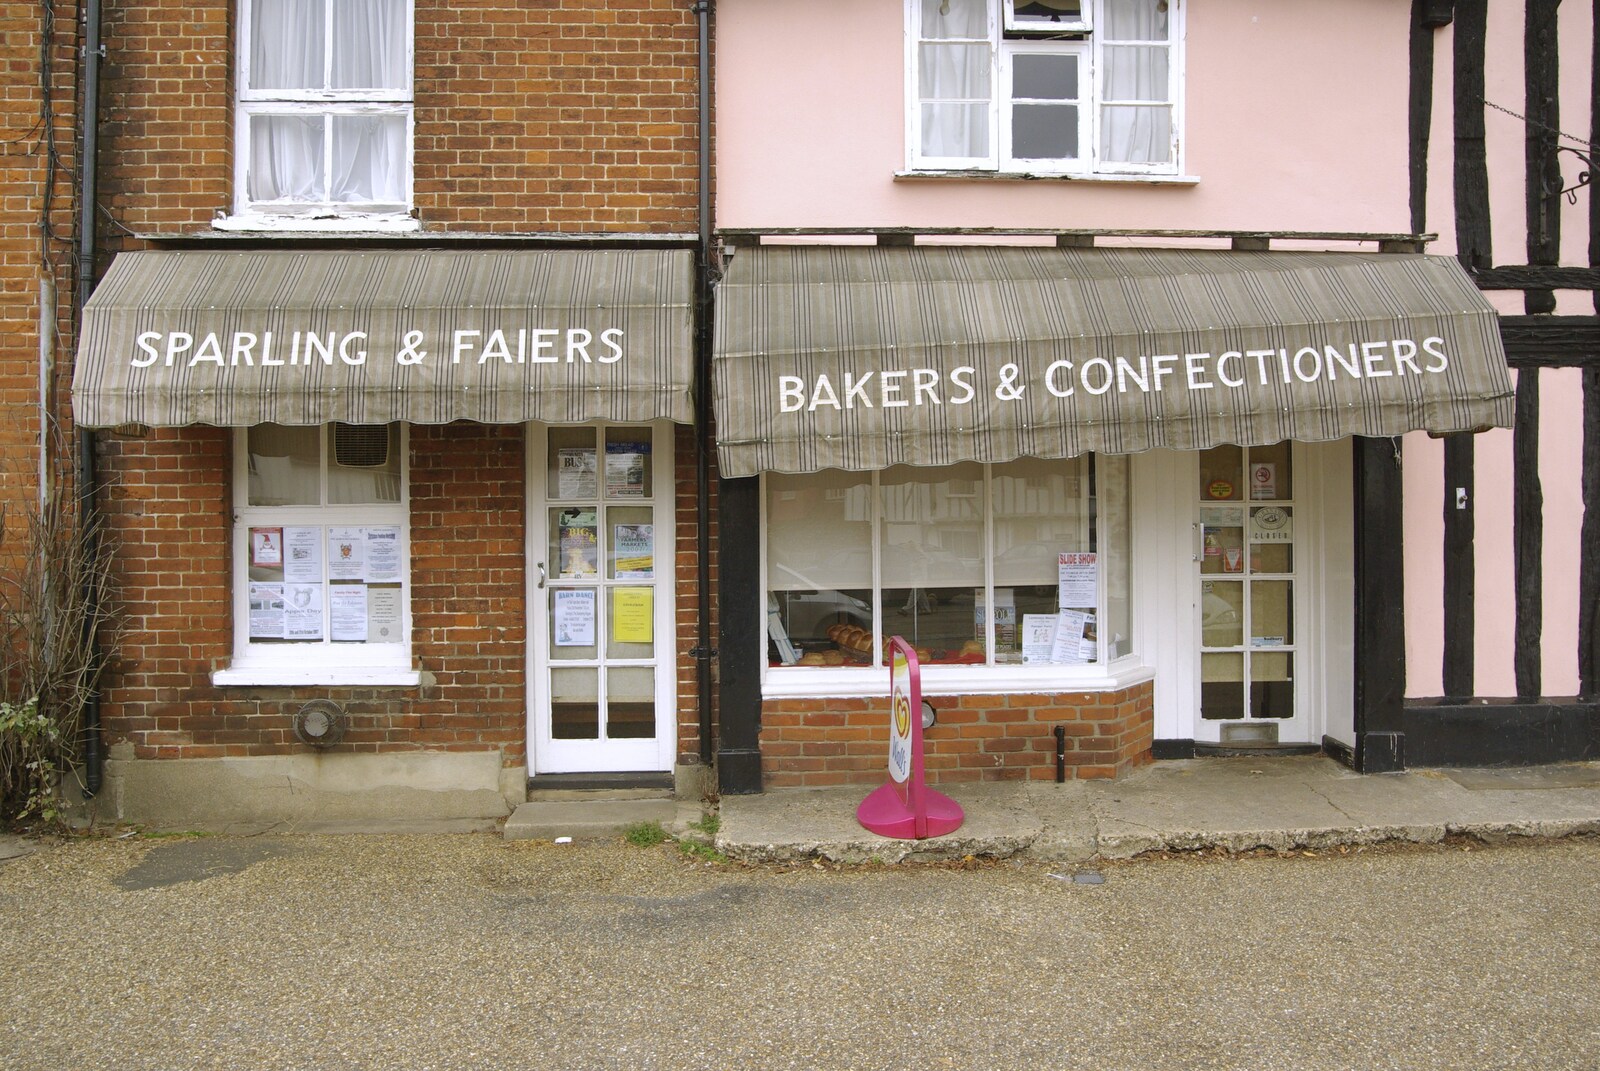 Old-school baker's signs from A Road Trip in an MX-5, and Athlete at the UEA, Lavenham and Norwich - 14th October 2007